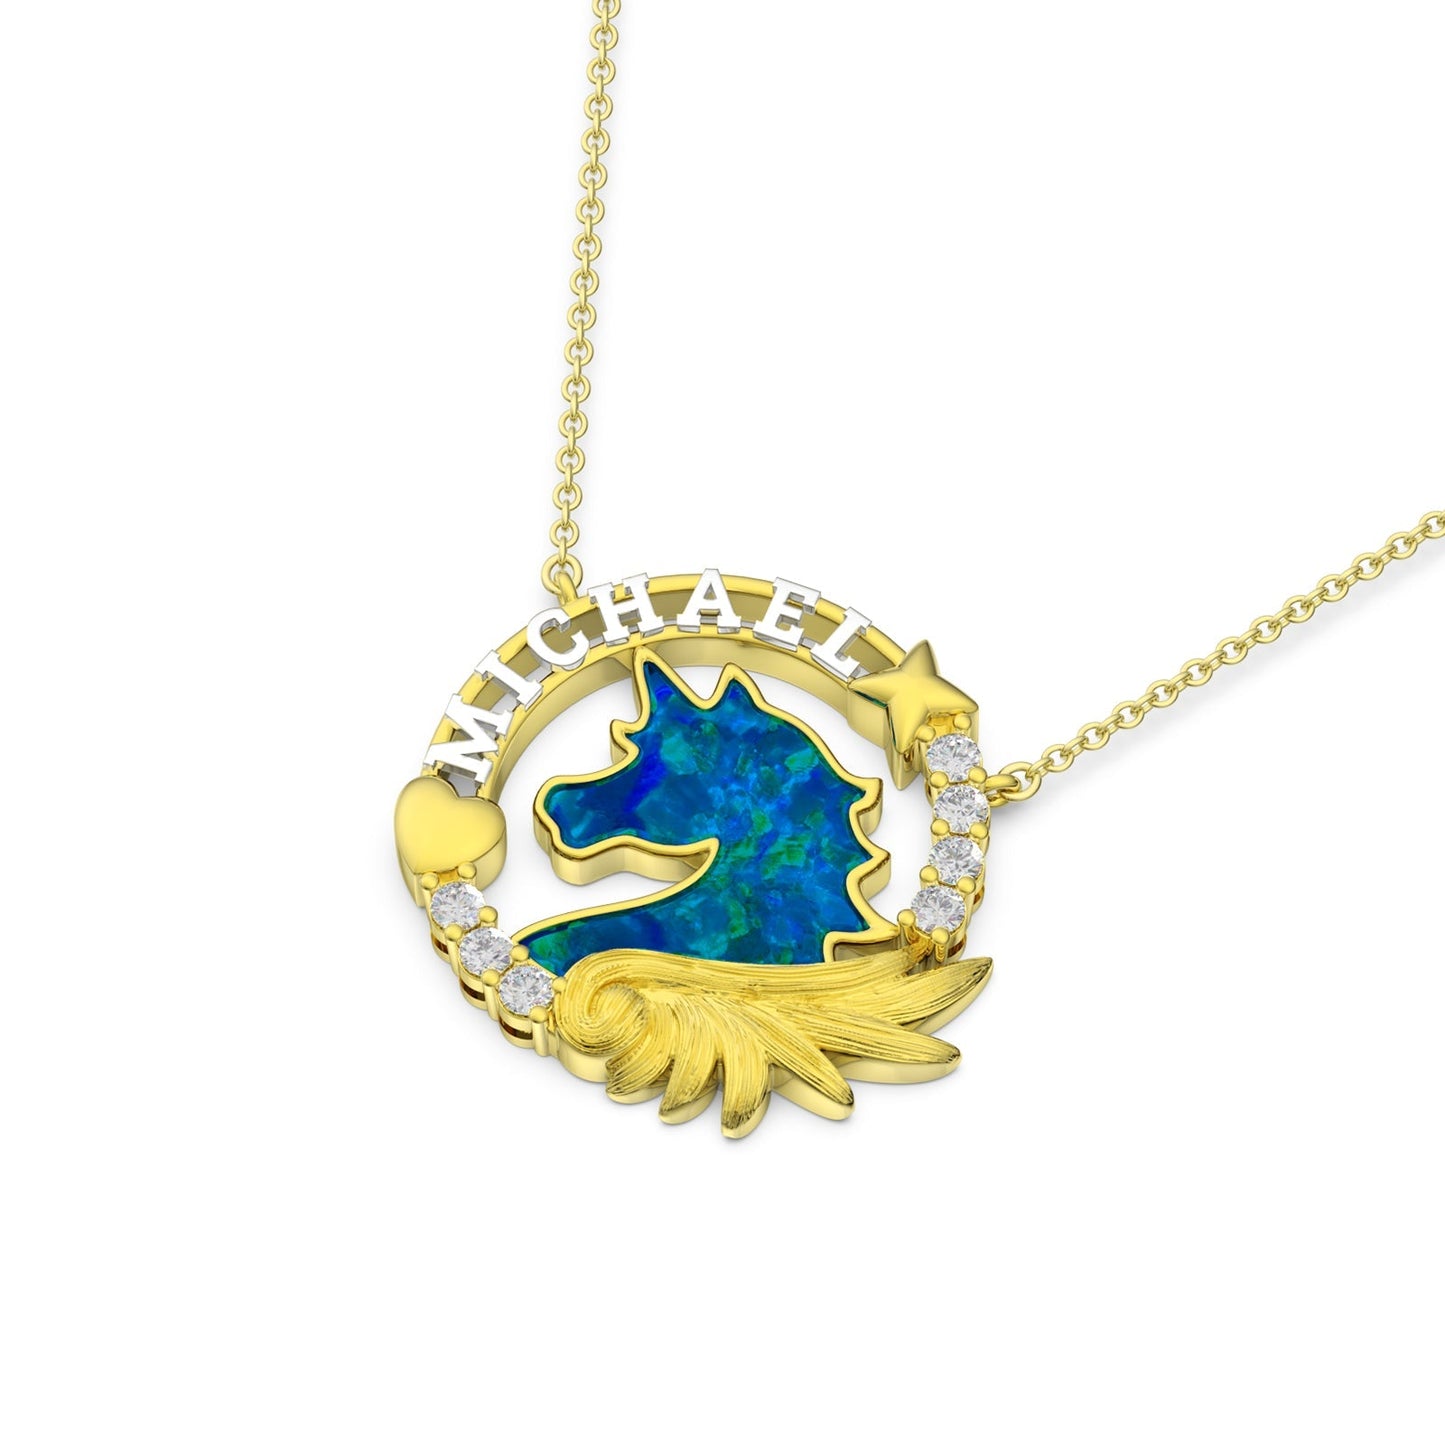 ThinkEngraved engraved necklace Personalized Blue opal Unicorn Gold Necklace With 3d Name Cut Out